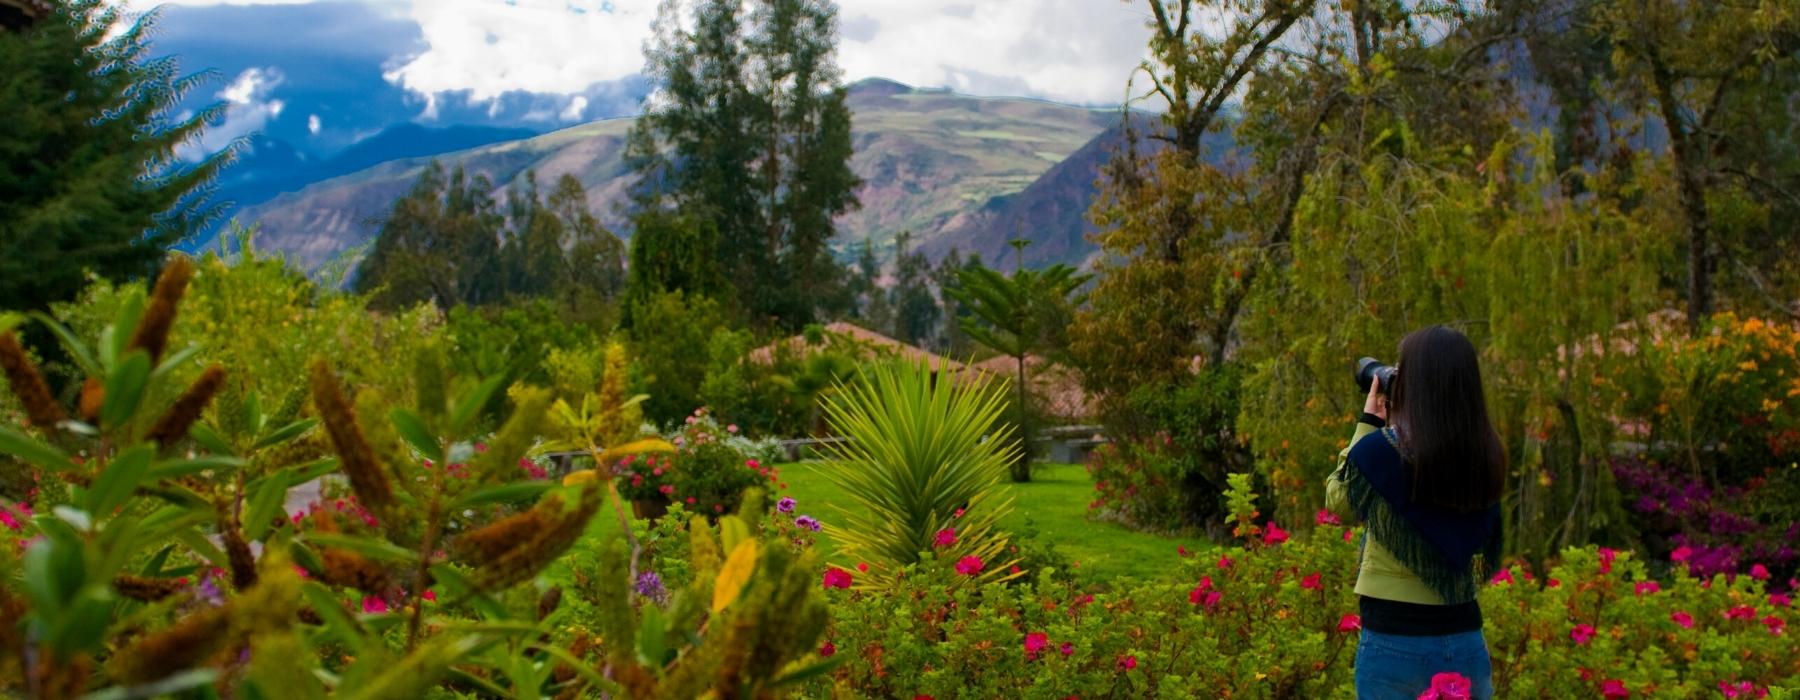 SACRED VALLEY LUXURY HOTELS